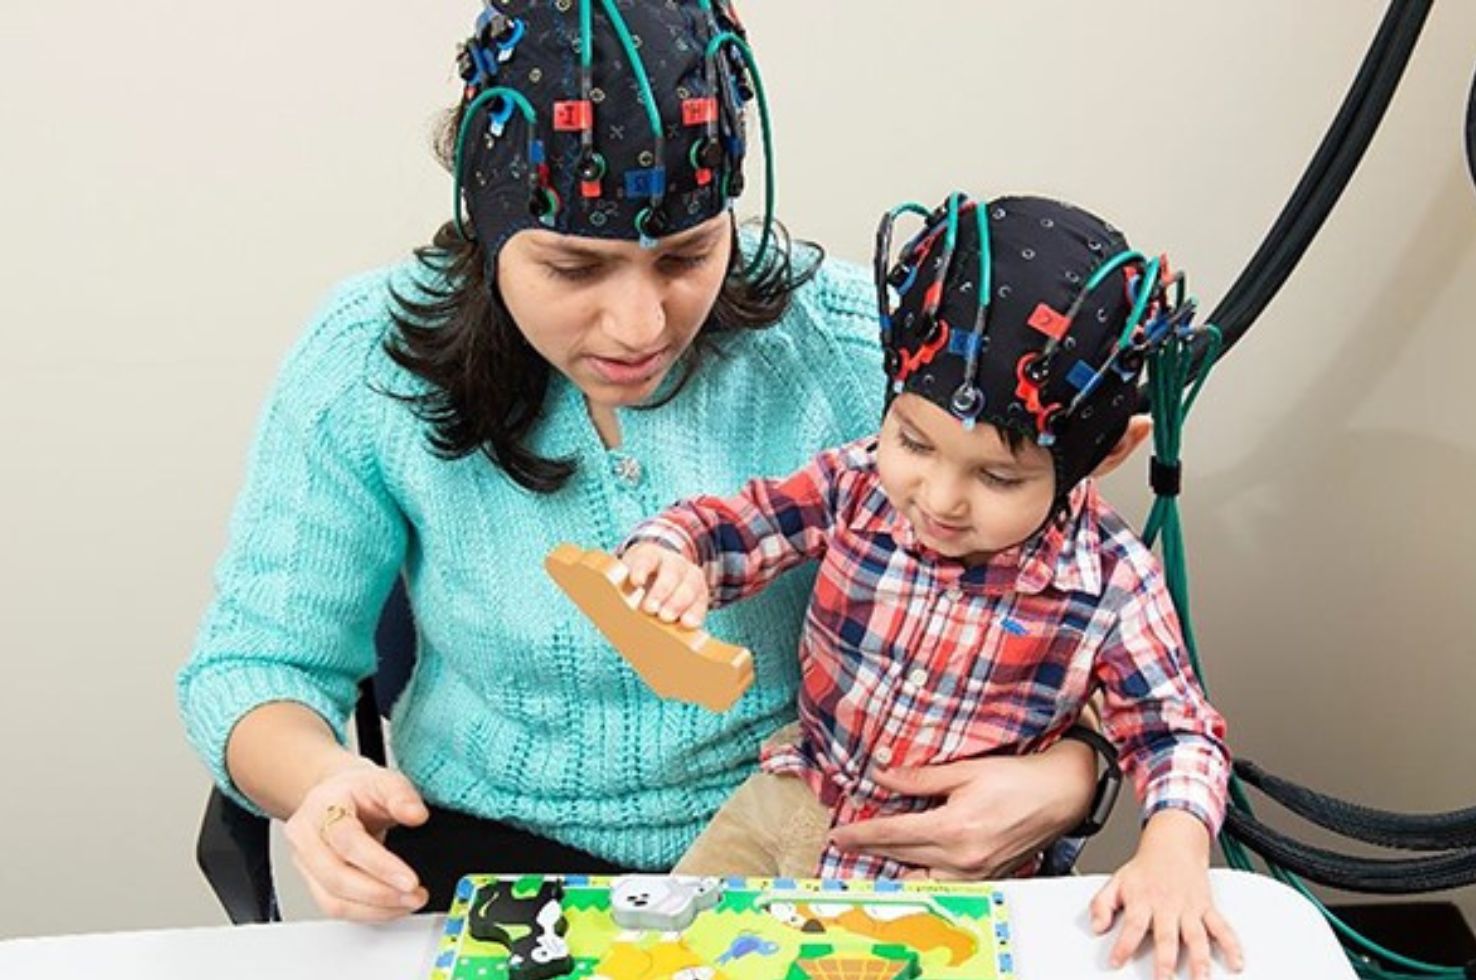 Researcher and Child with Headsets On